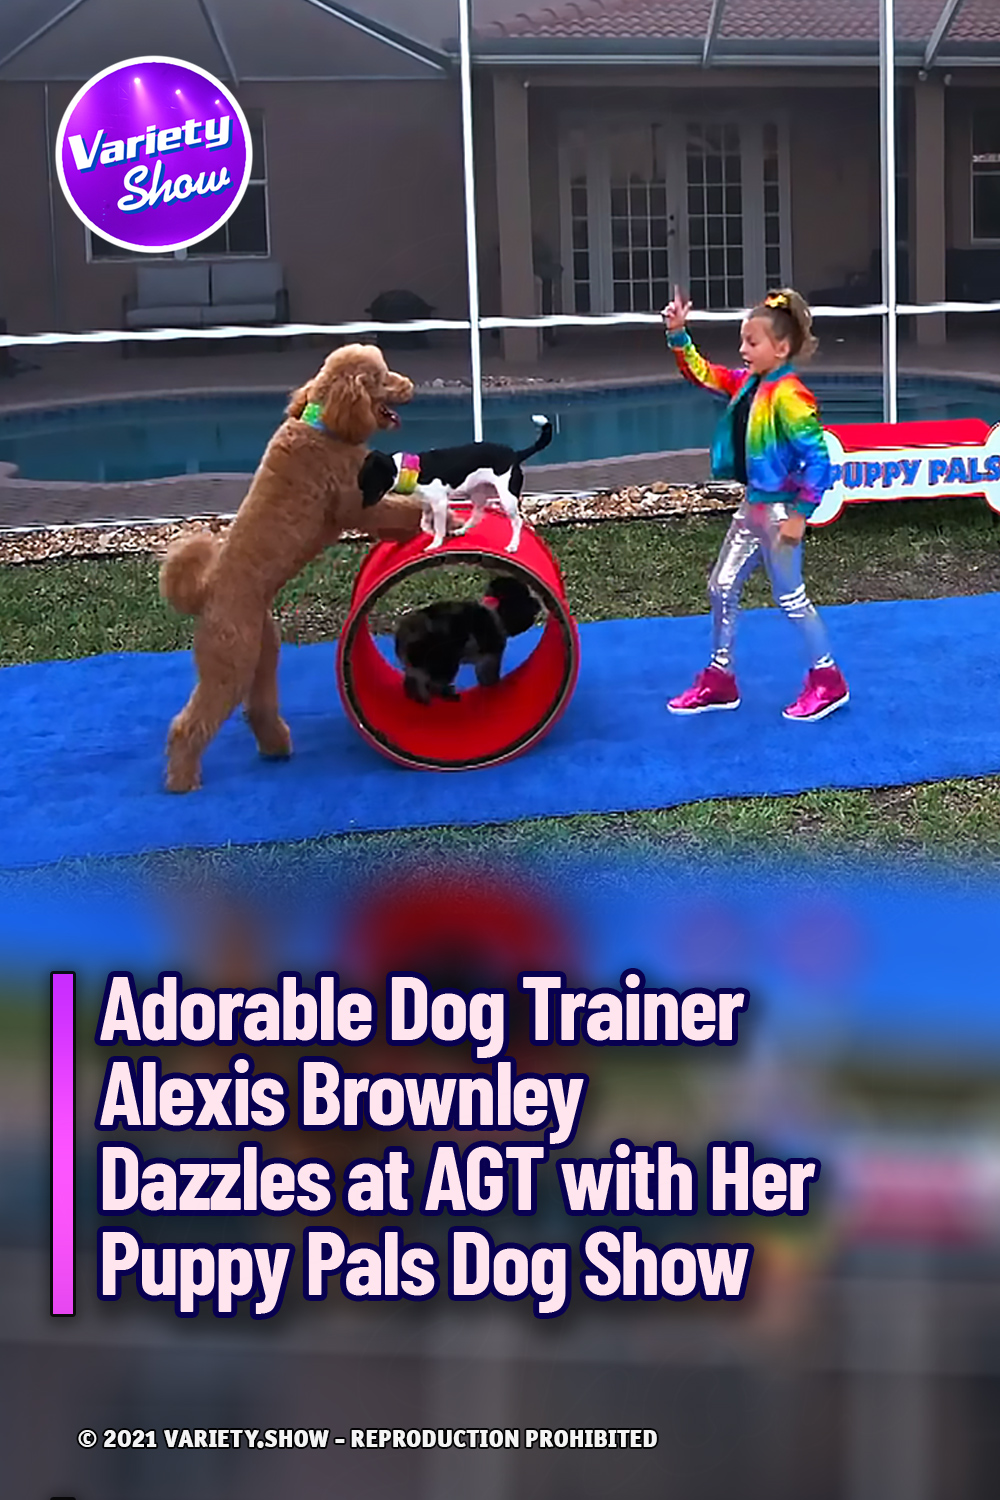 Adorable Dog Trainer Alexis Brownley Dazzles at AGT with Her Puppy Pals Dog Show